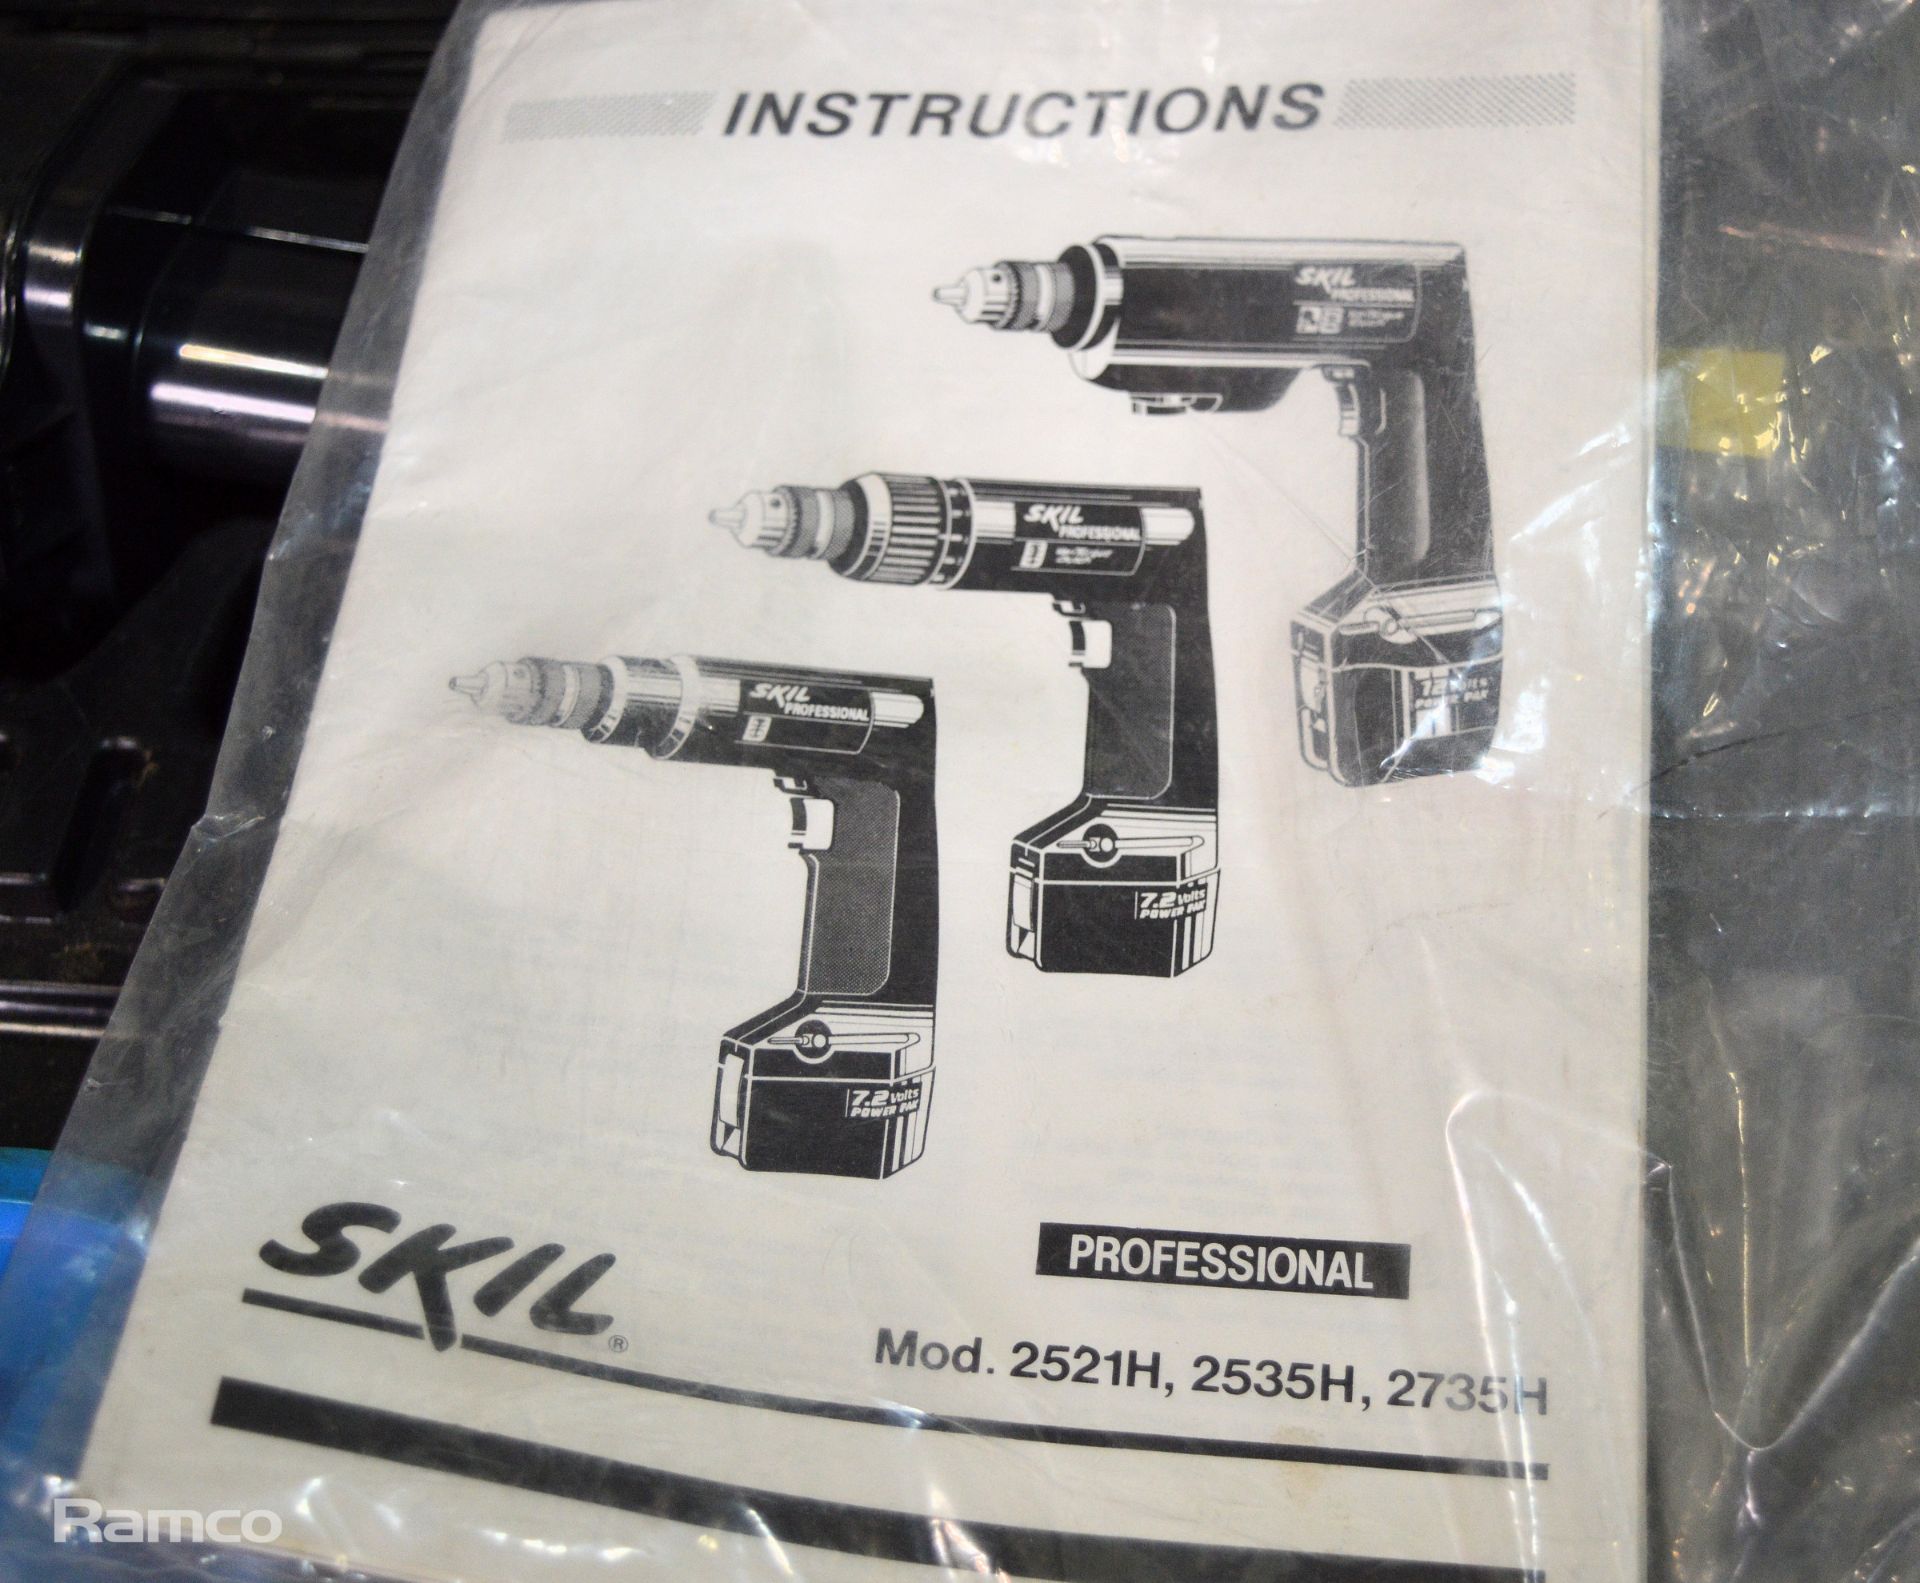 Skil 2735H cordless drill - no battery charger - Image 4 of 5